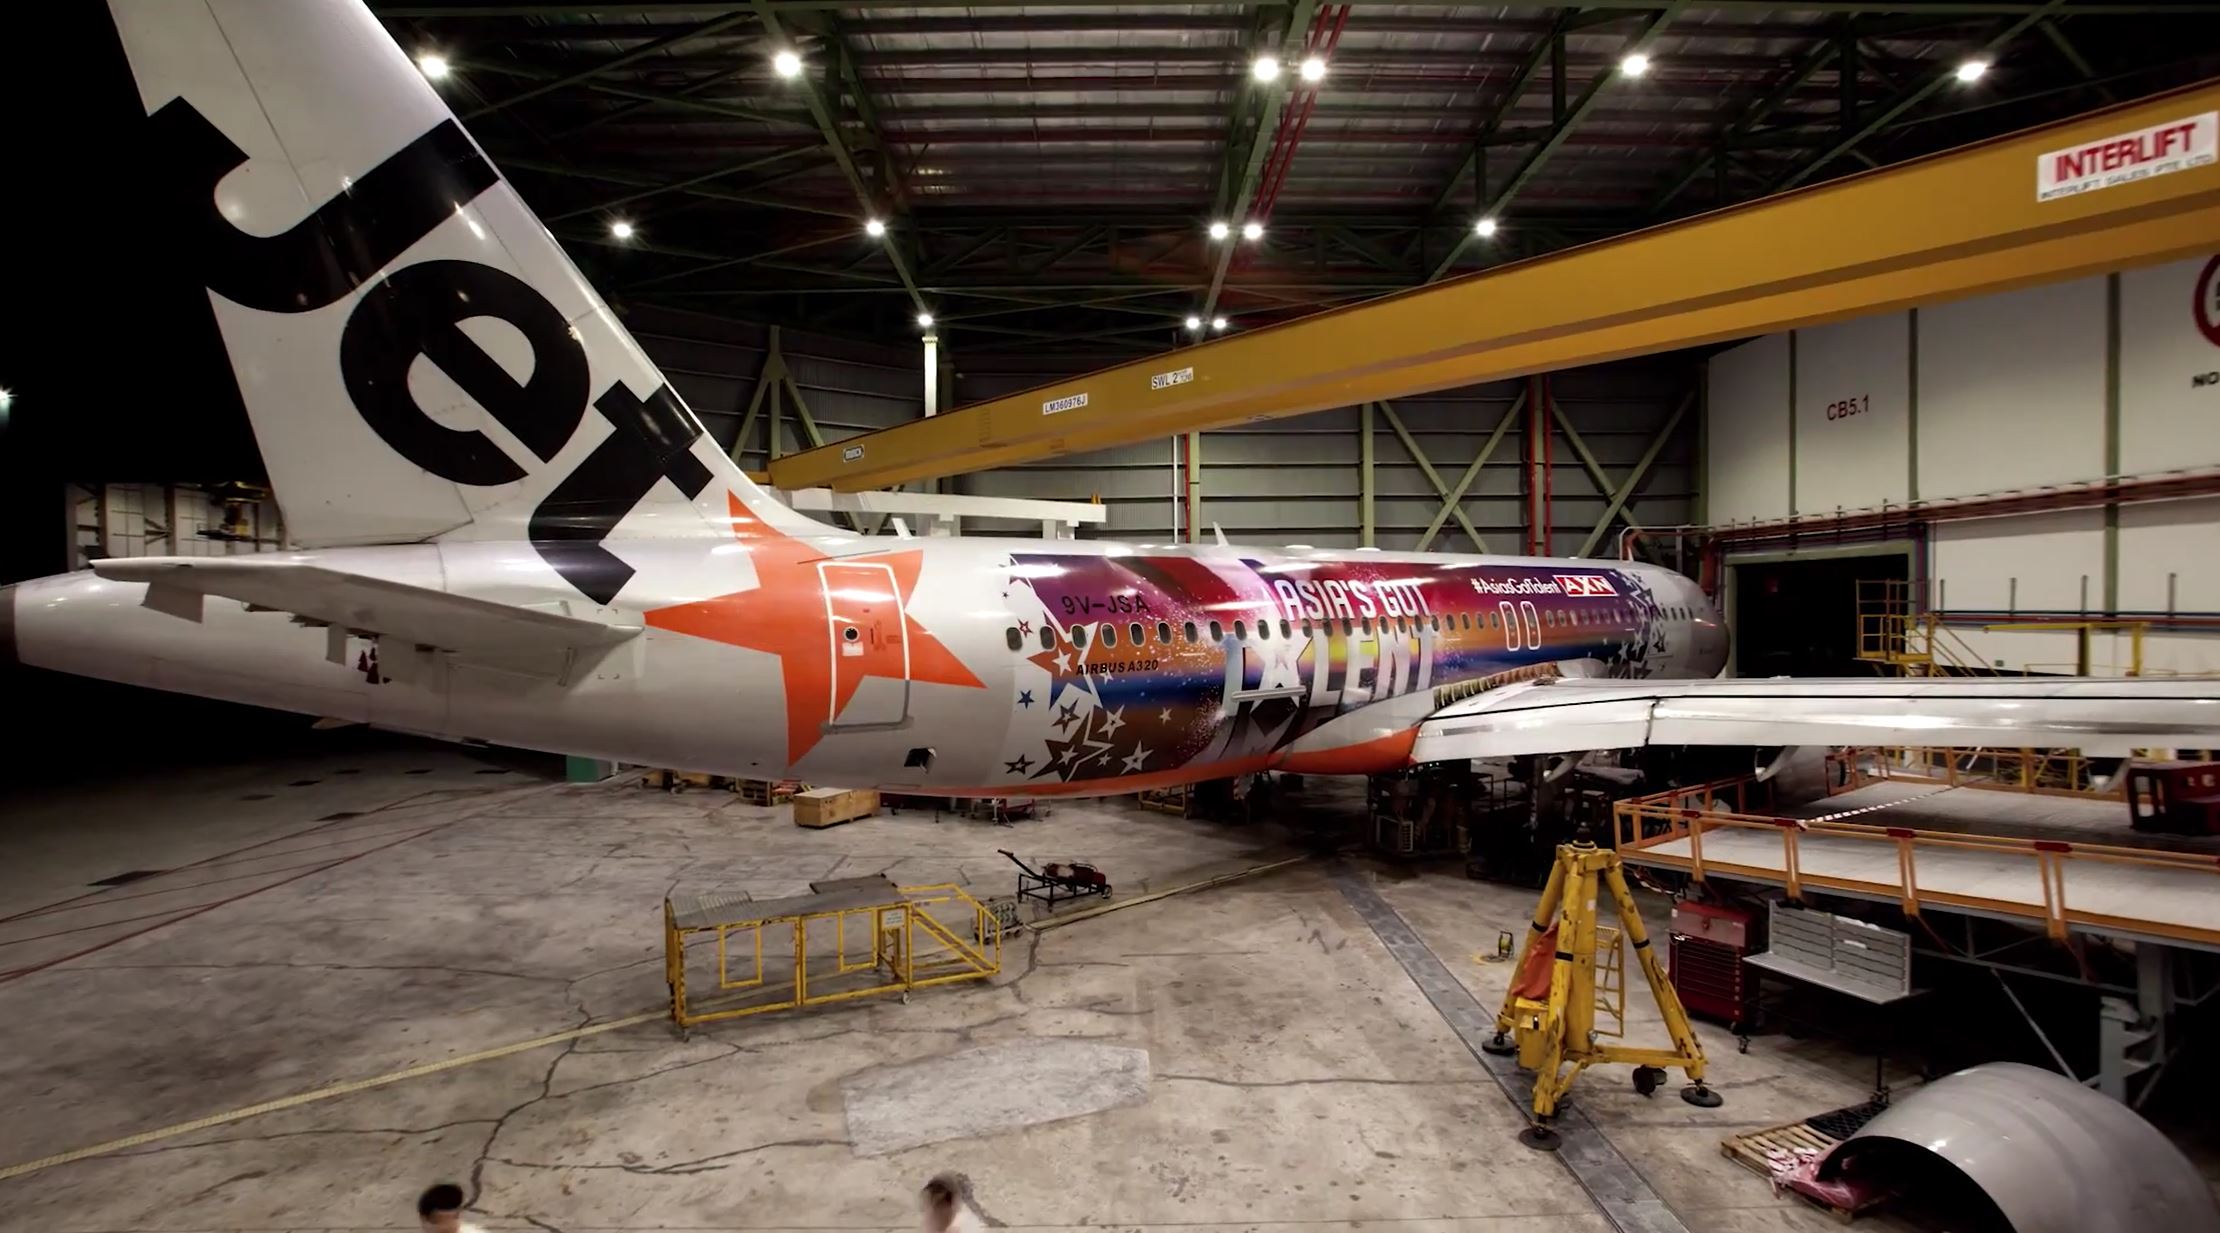 Jetstar – Official Airline of Asia’s Got Talent